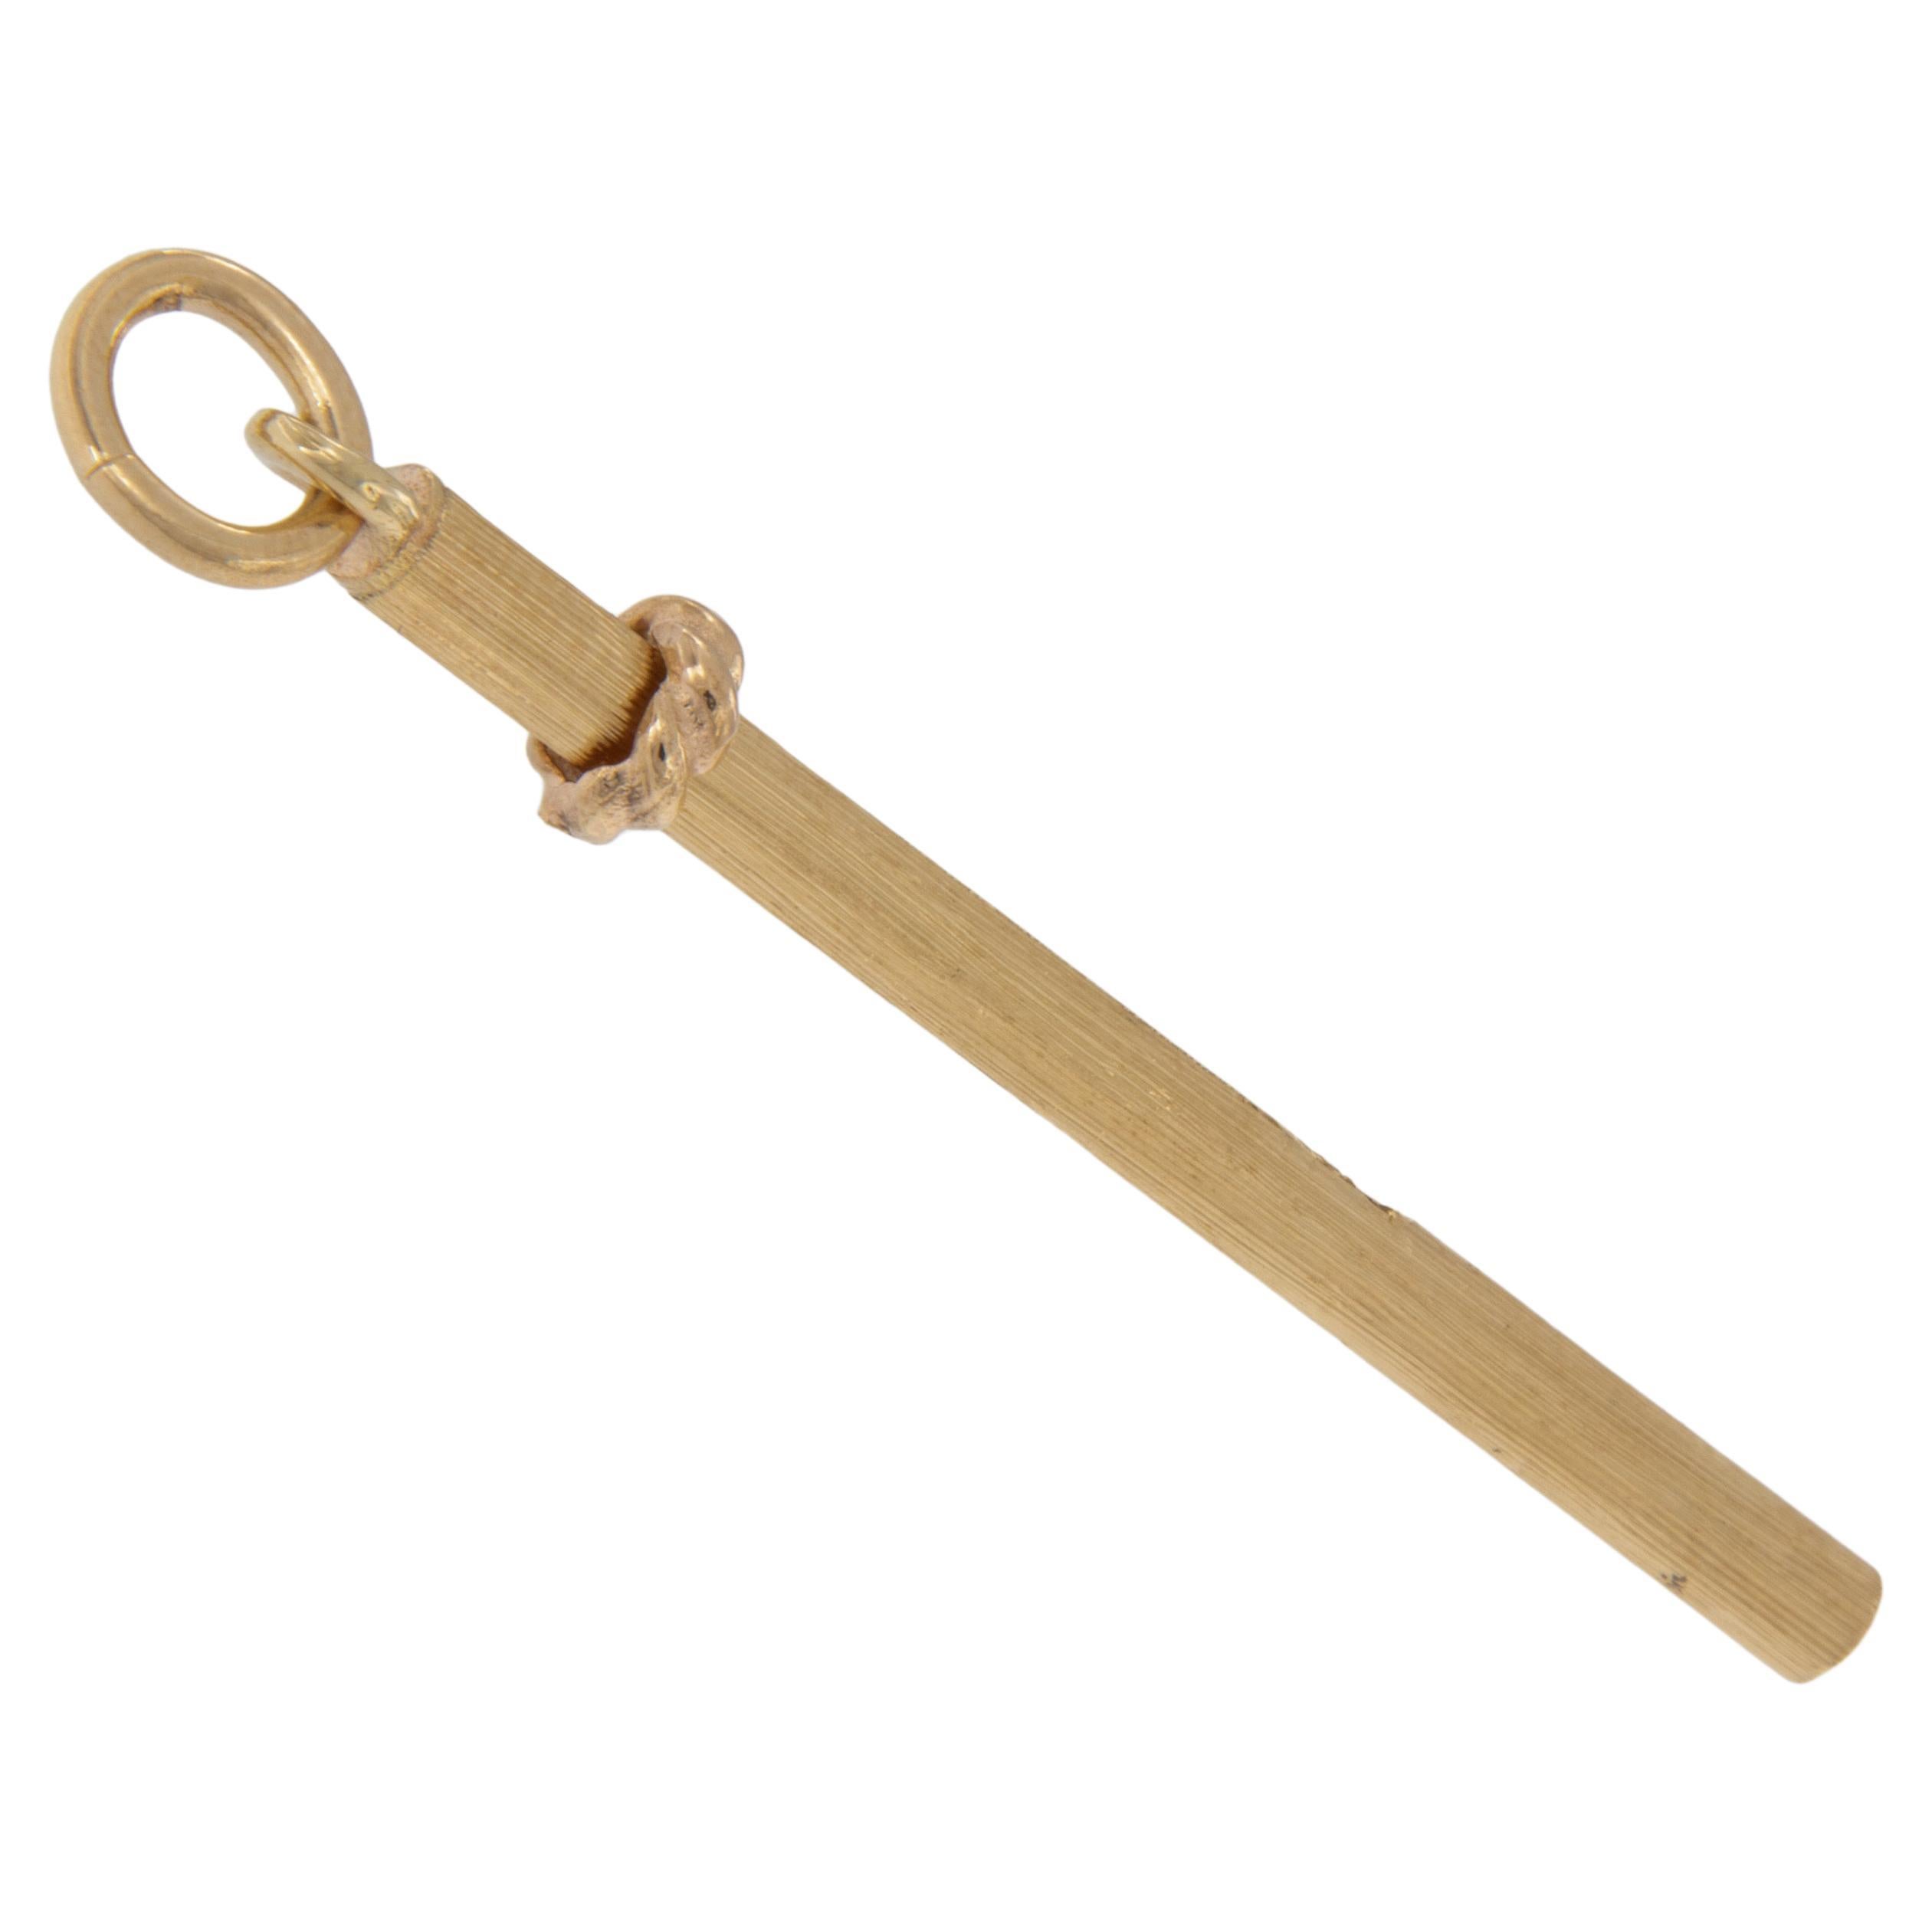 Hygiene with style! Vintage 14 karat yellow gold retractable tooth pick lets you keep your mouth in tip top shape discretely but in style. Has a loop at top to connect to what you want for handiness. Complimentary signature wrapping and presentation